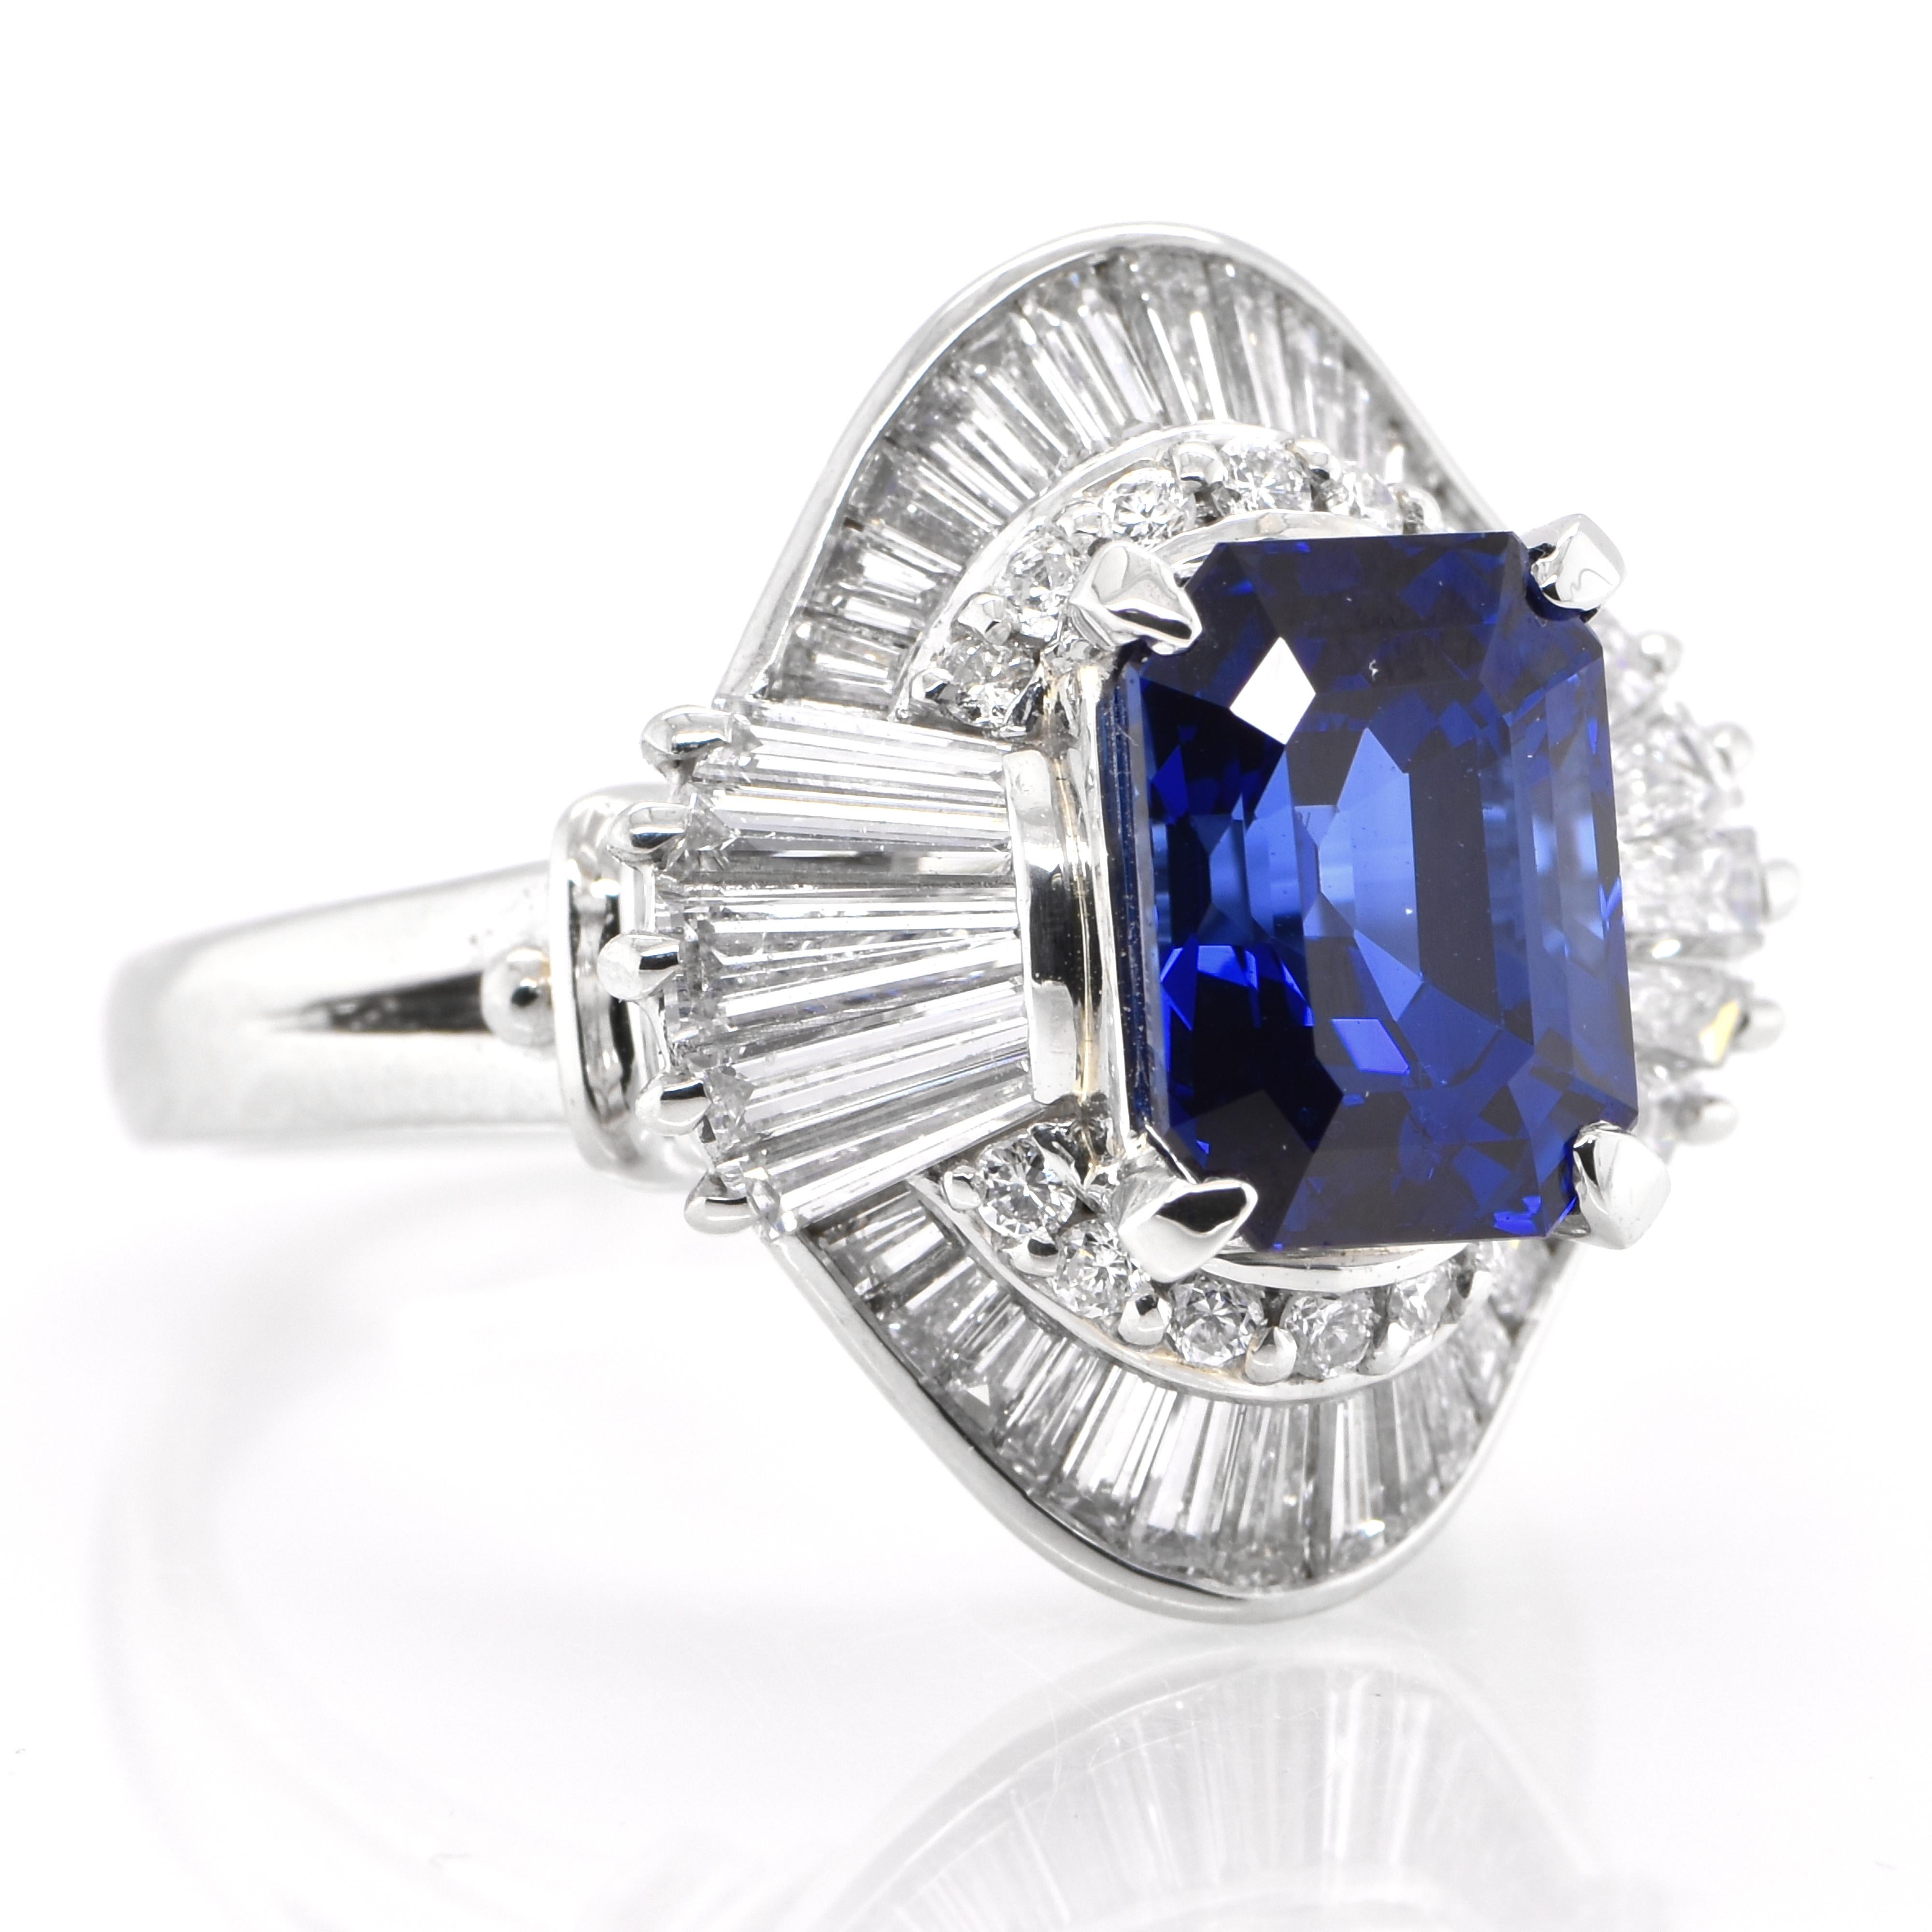 A beautiful ring featuring a Gubelin Certified 3.67 Carat Natural Ceylon Sapphire and 1.32 Carats Diamond Accents set in Platinum. Sapphires have extraordinary durability - they excel in hardness as well as toughness and durability making them very